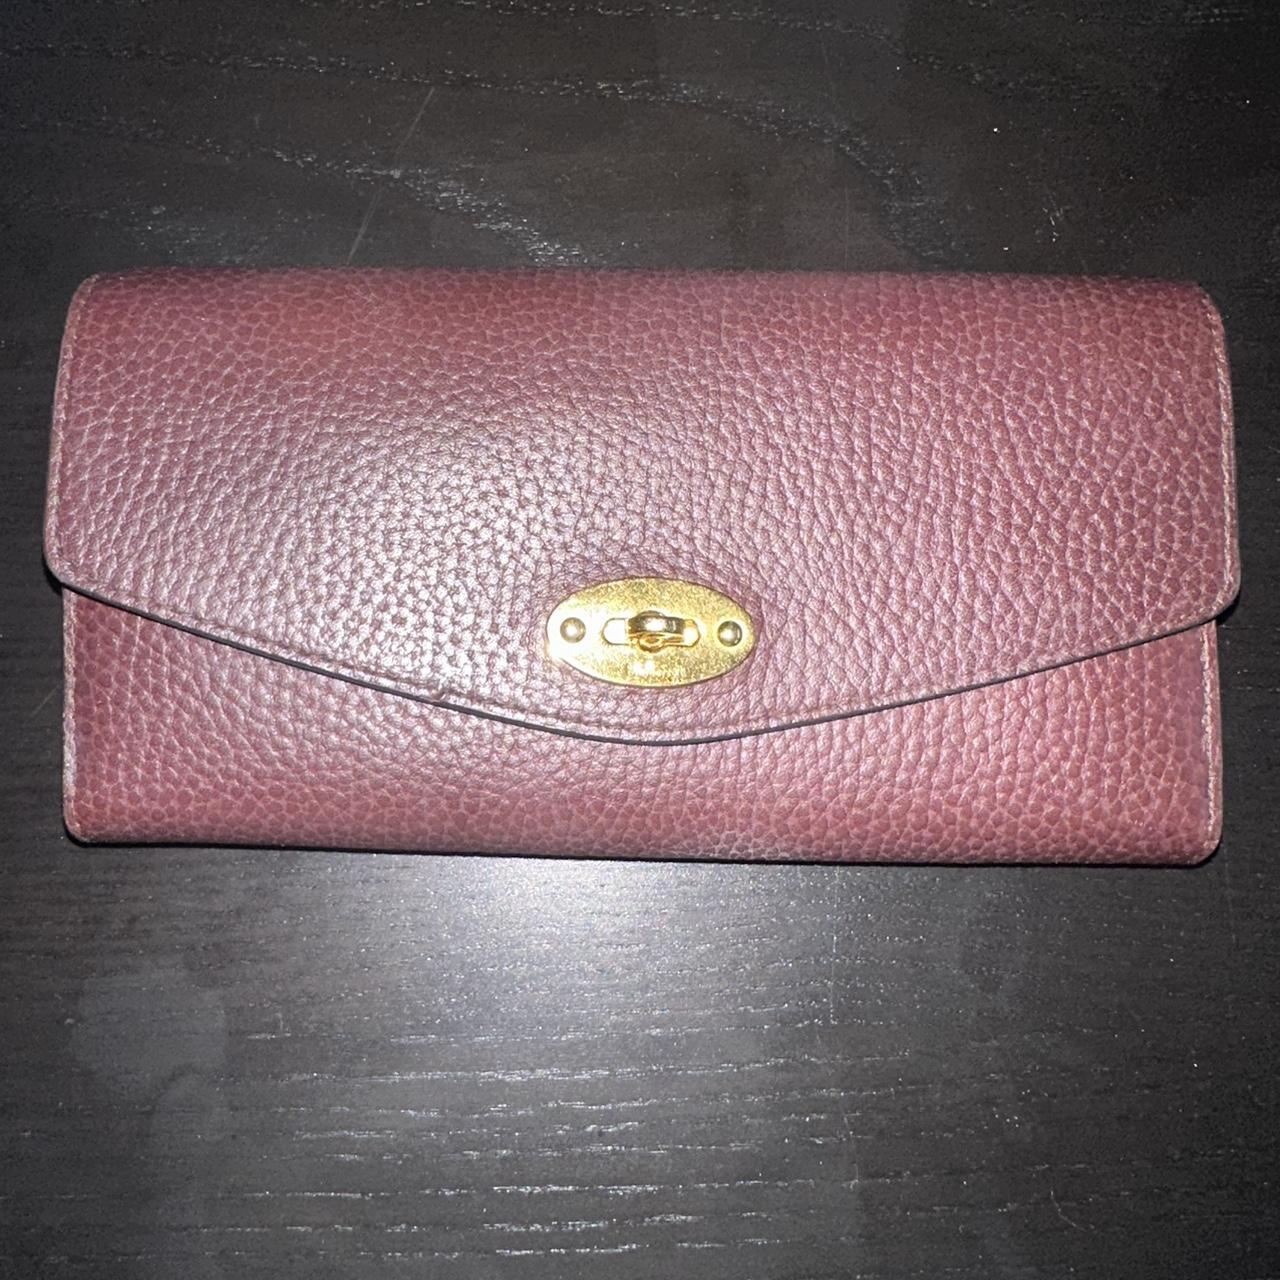 Mulberry Darley wallet in ‘Oxblood’ , Perfect...